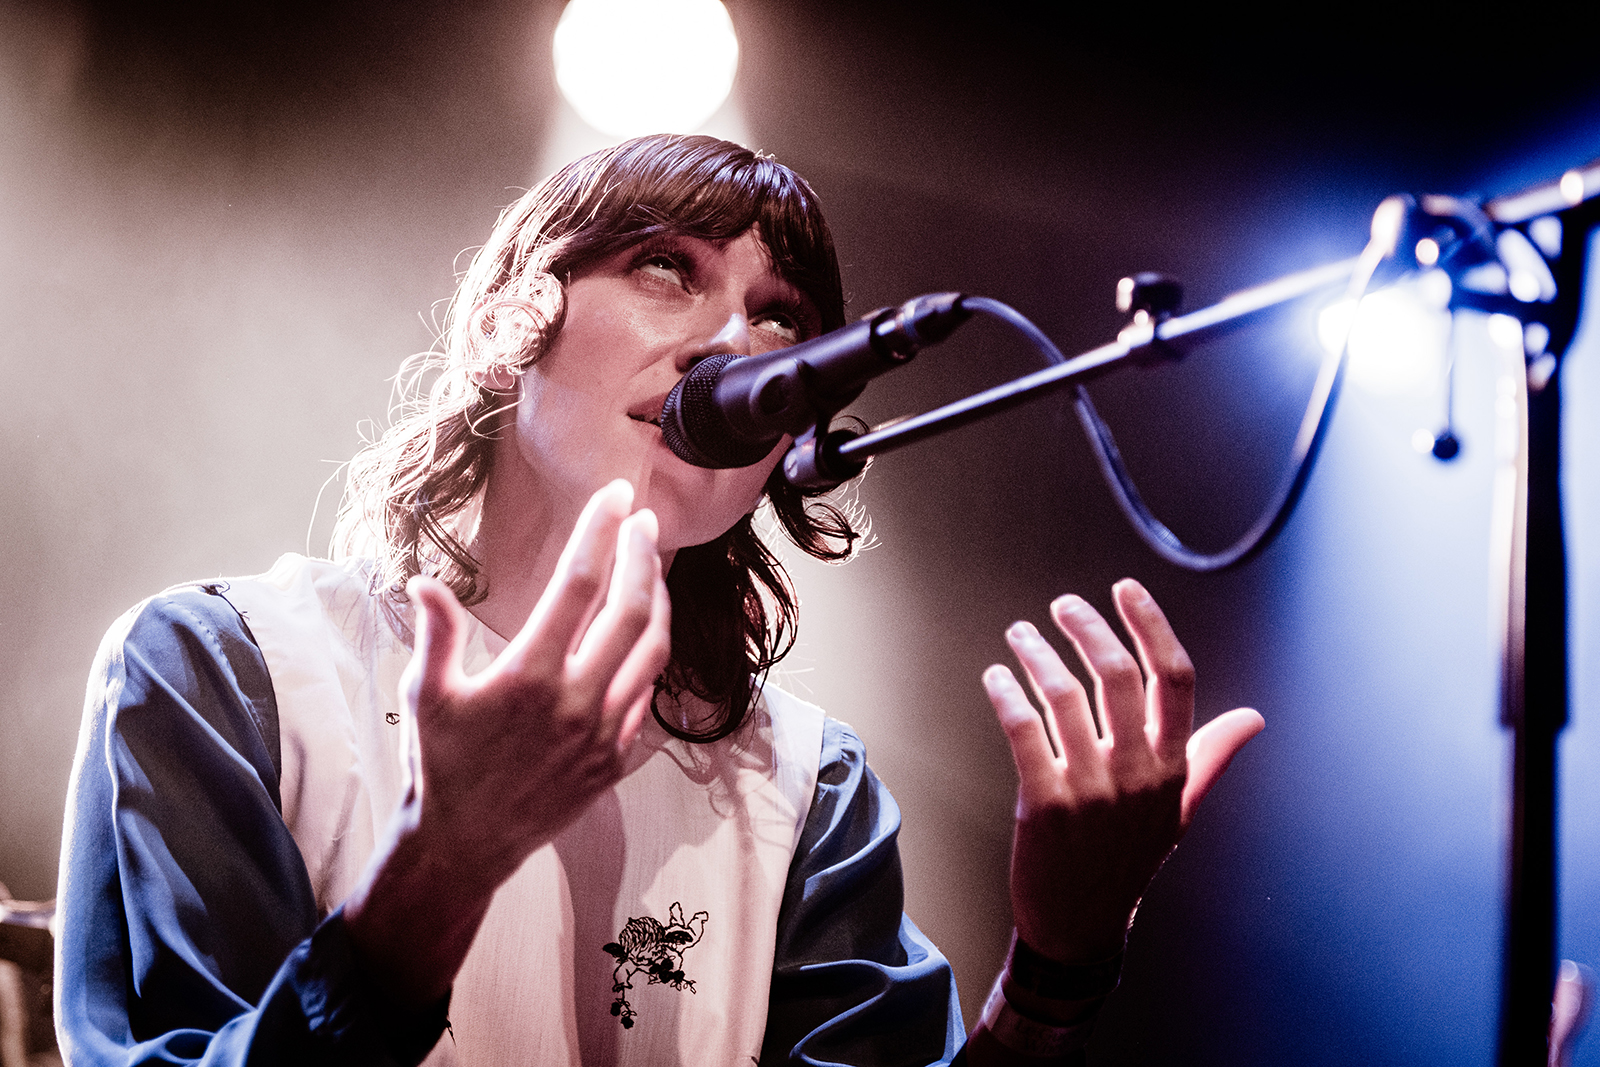 Aldous Harding - Live at Le Guess Who? 2019